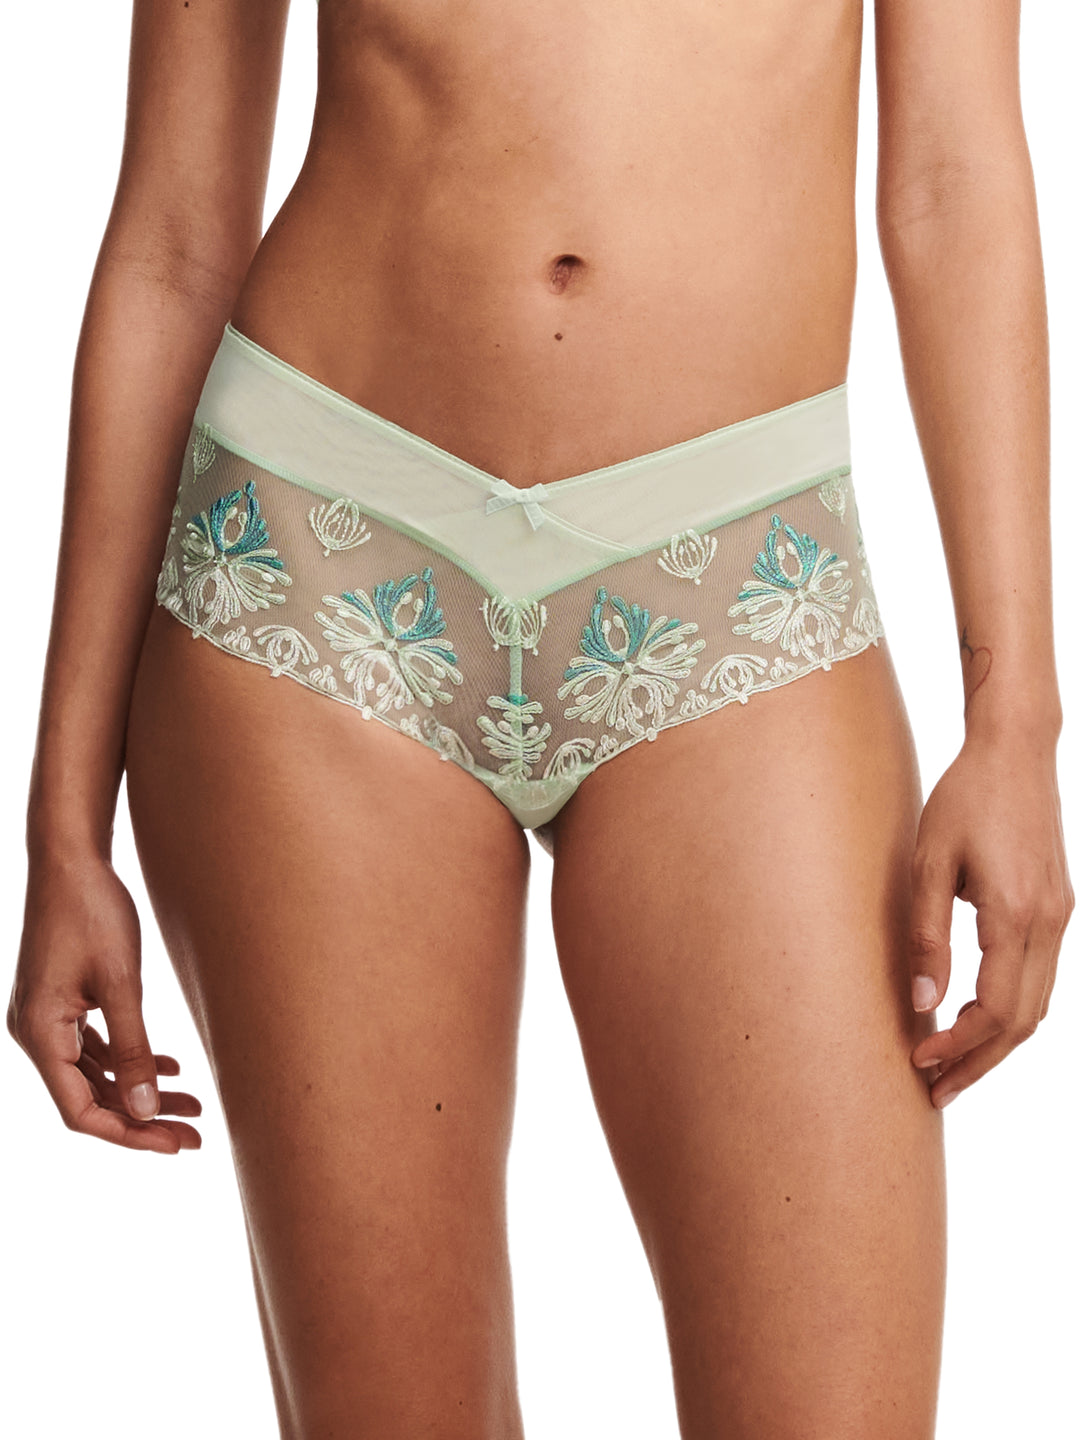 Chantelle - Champs Elysees Shorty Green Lily Mehrfarbig